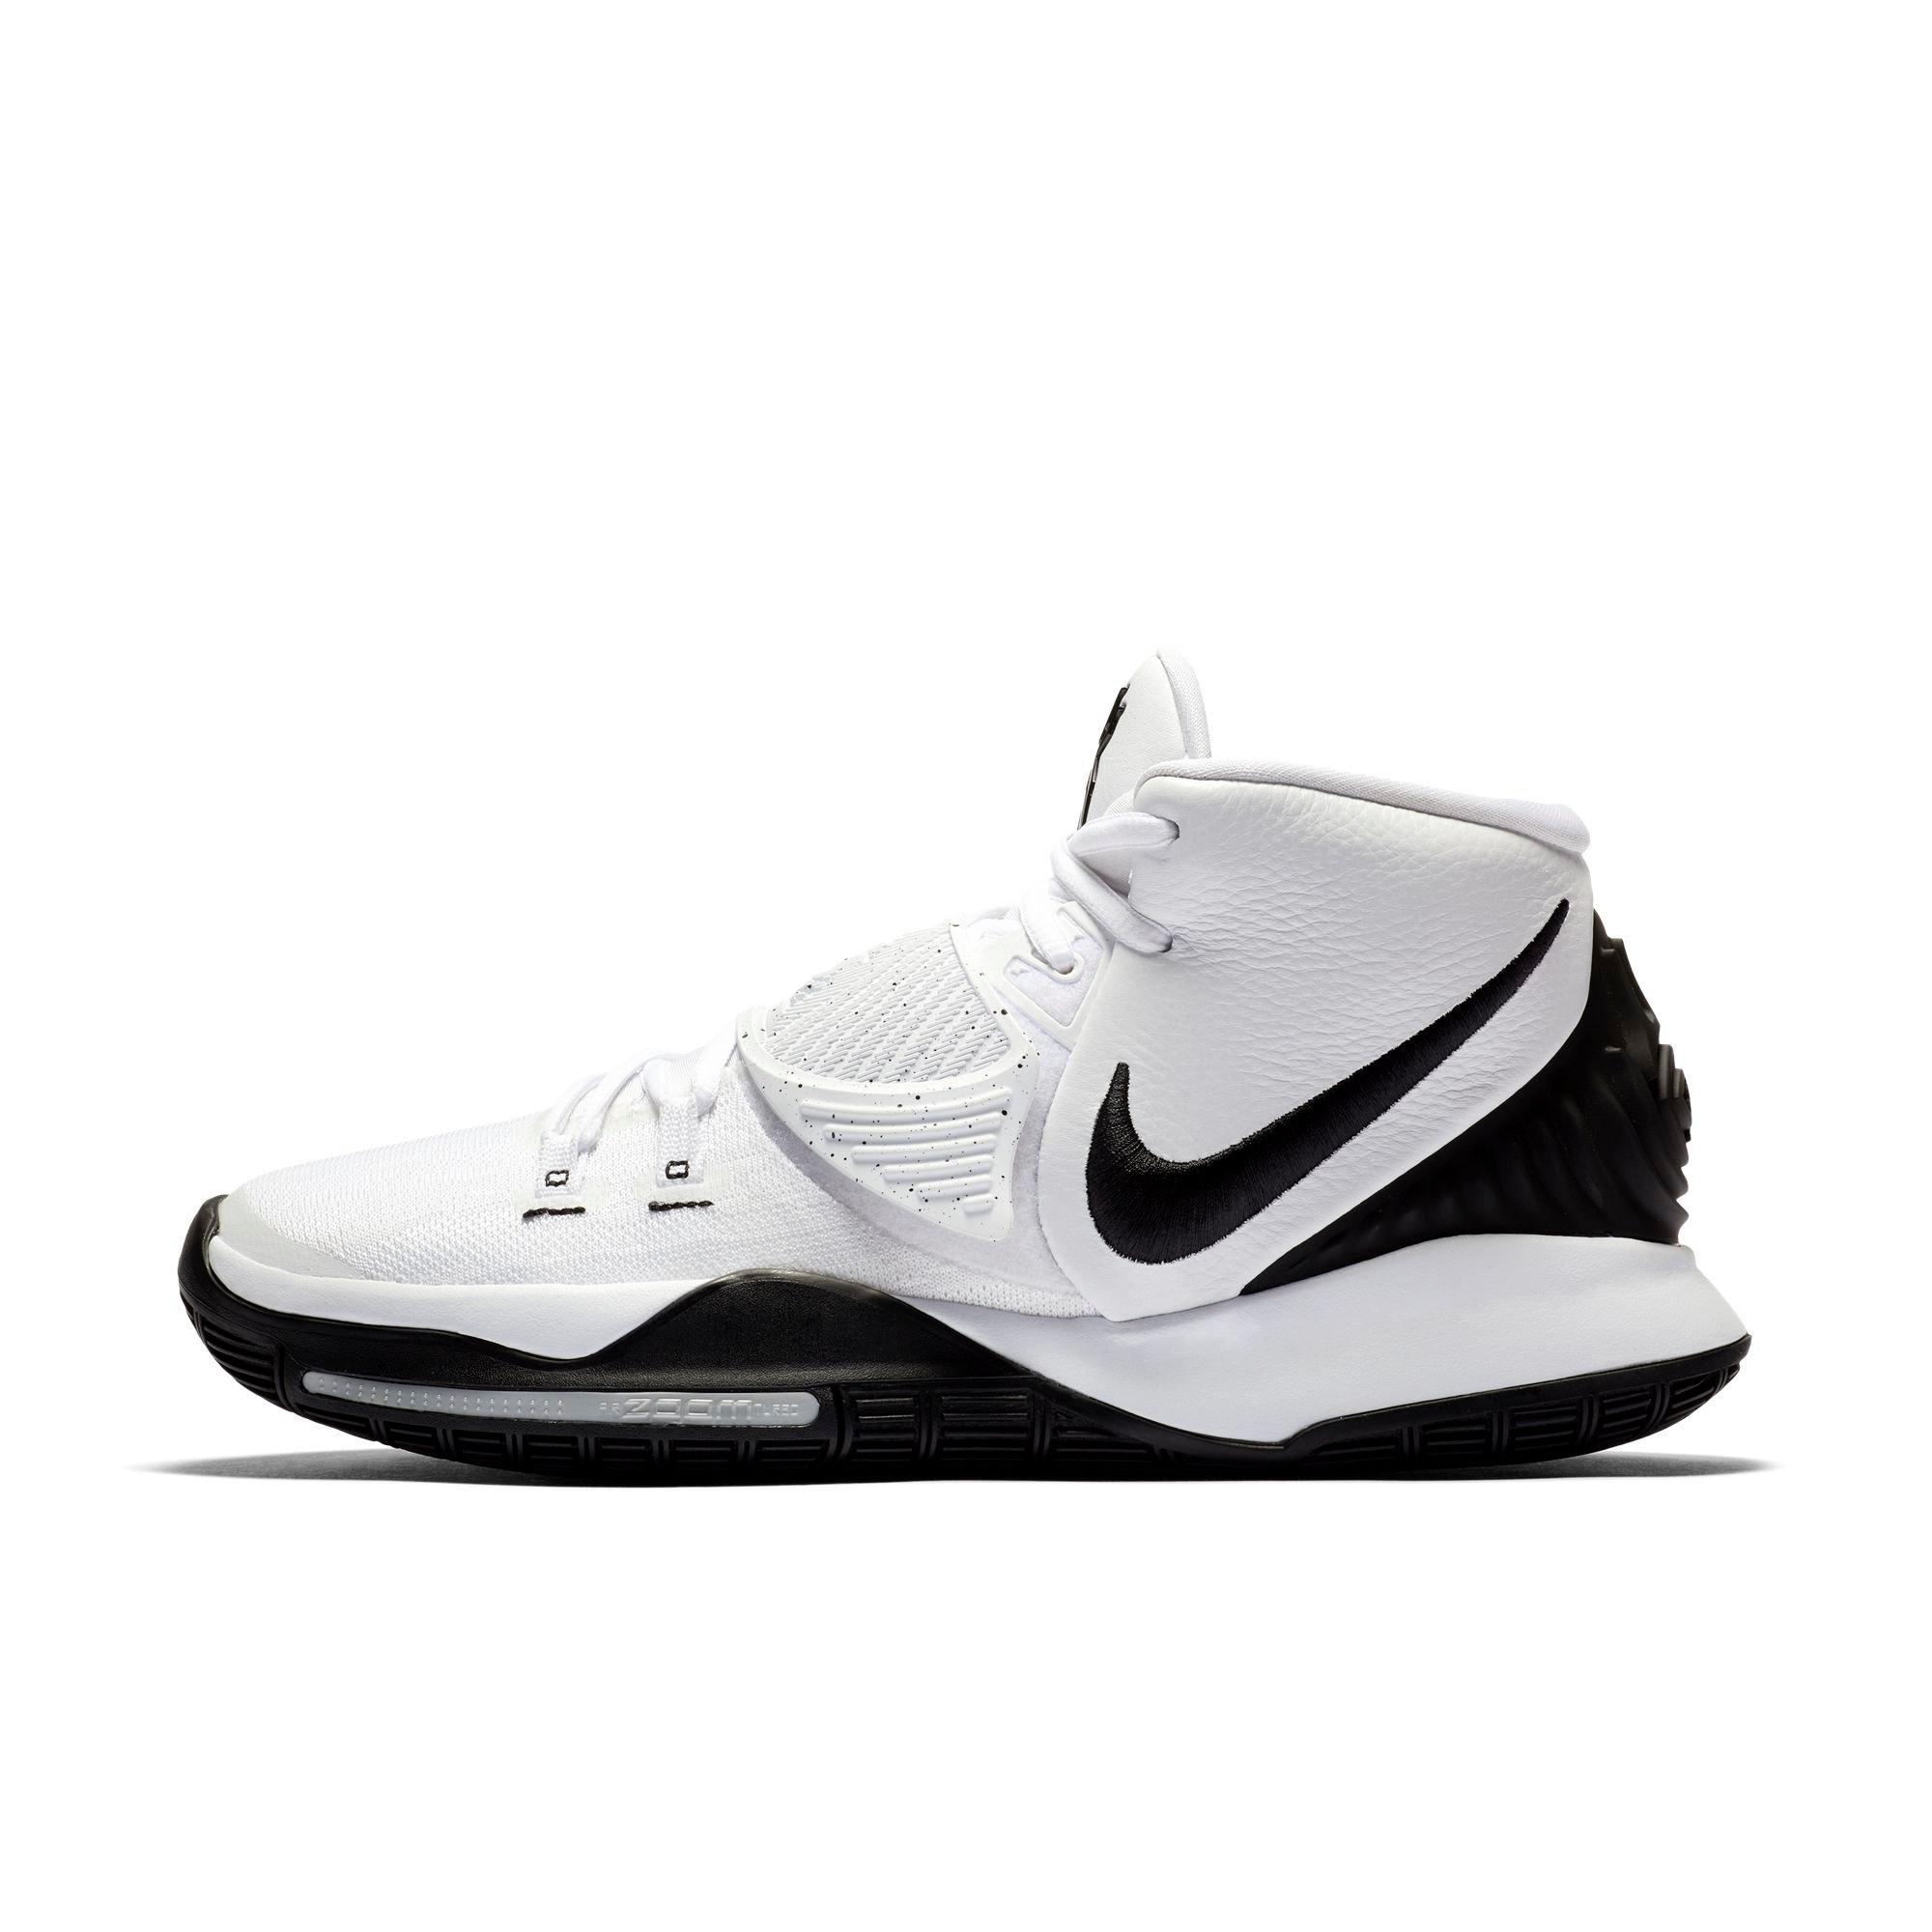 white kyrie basketball shoes